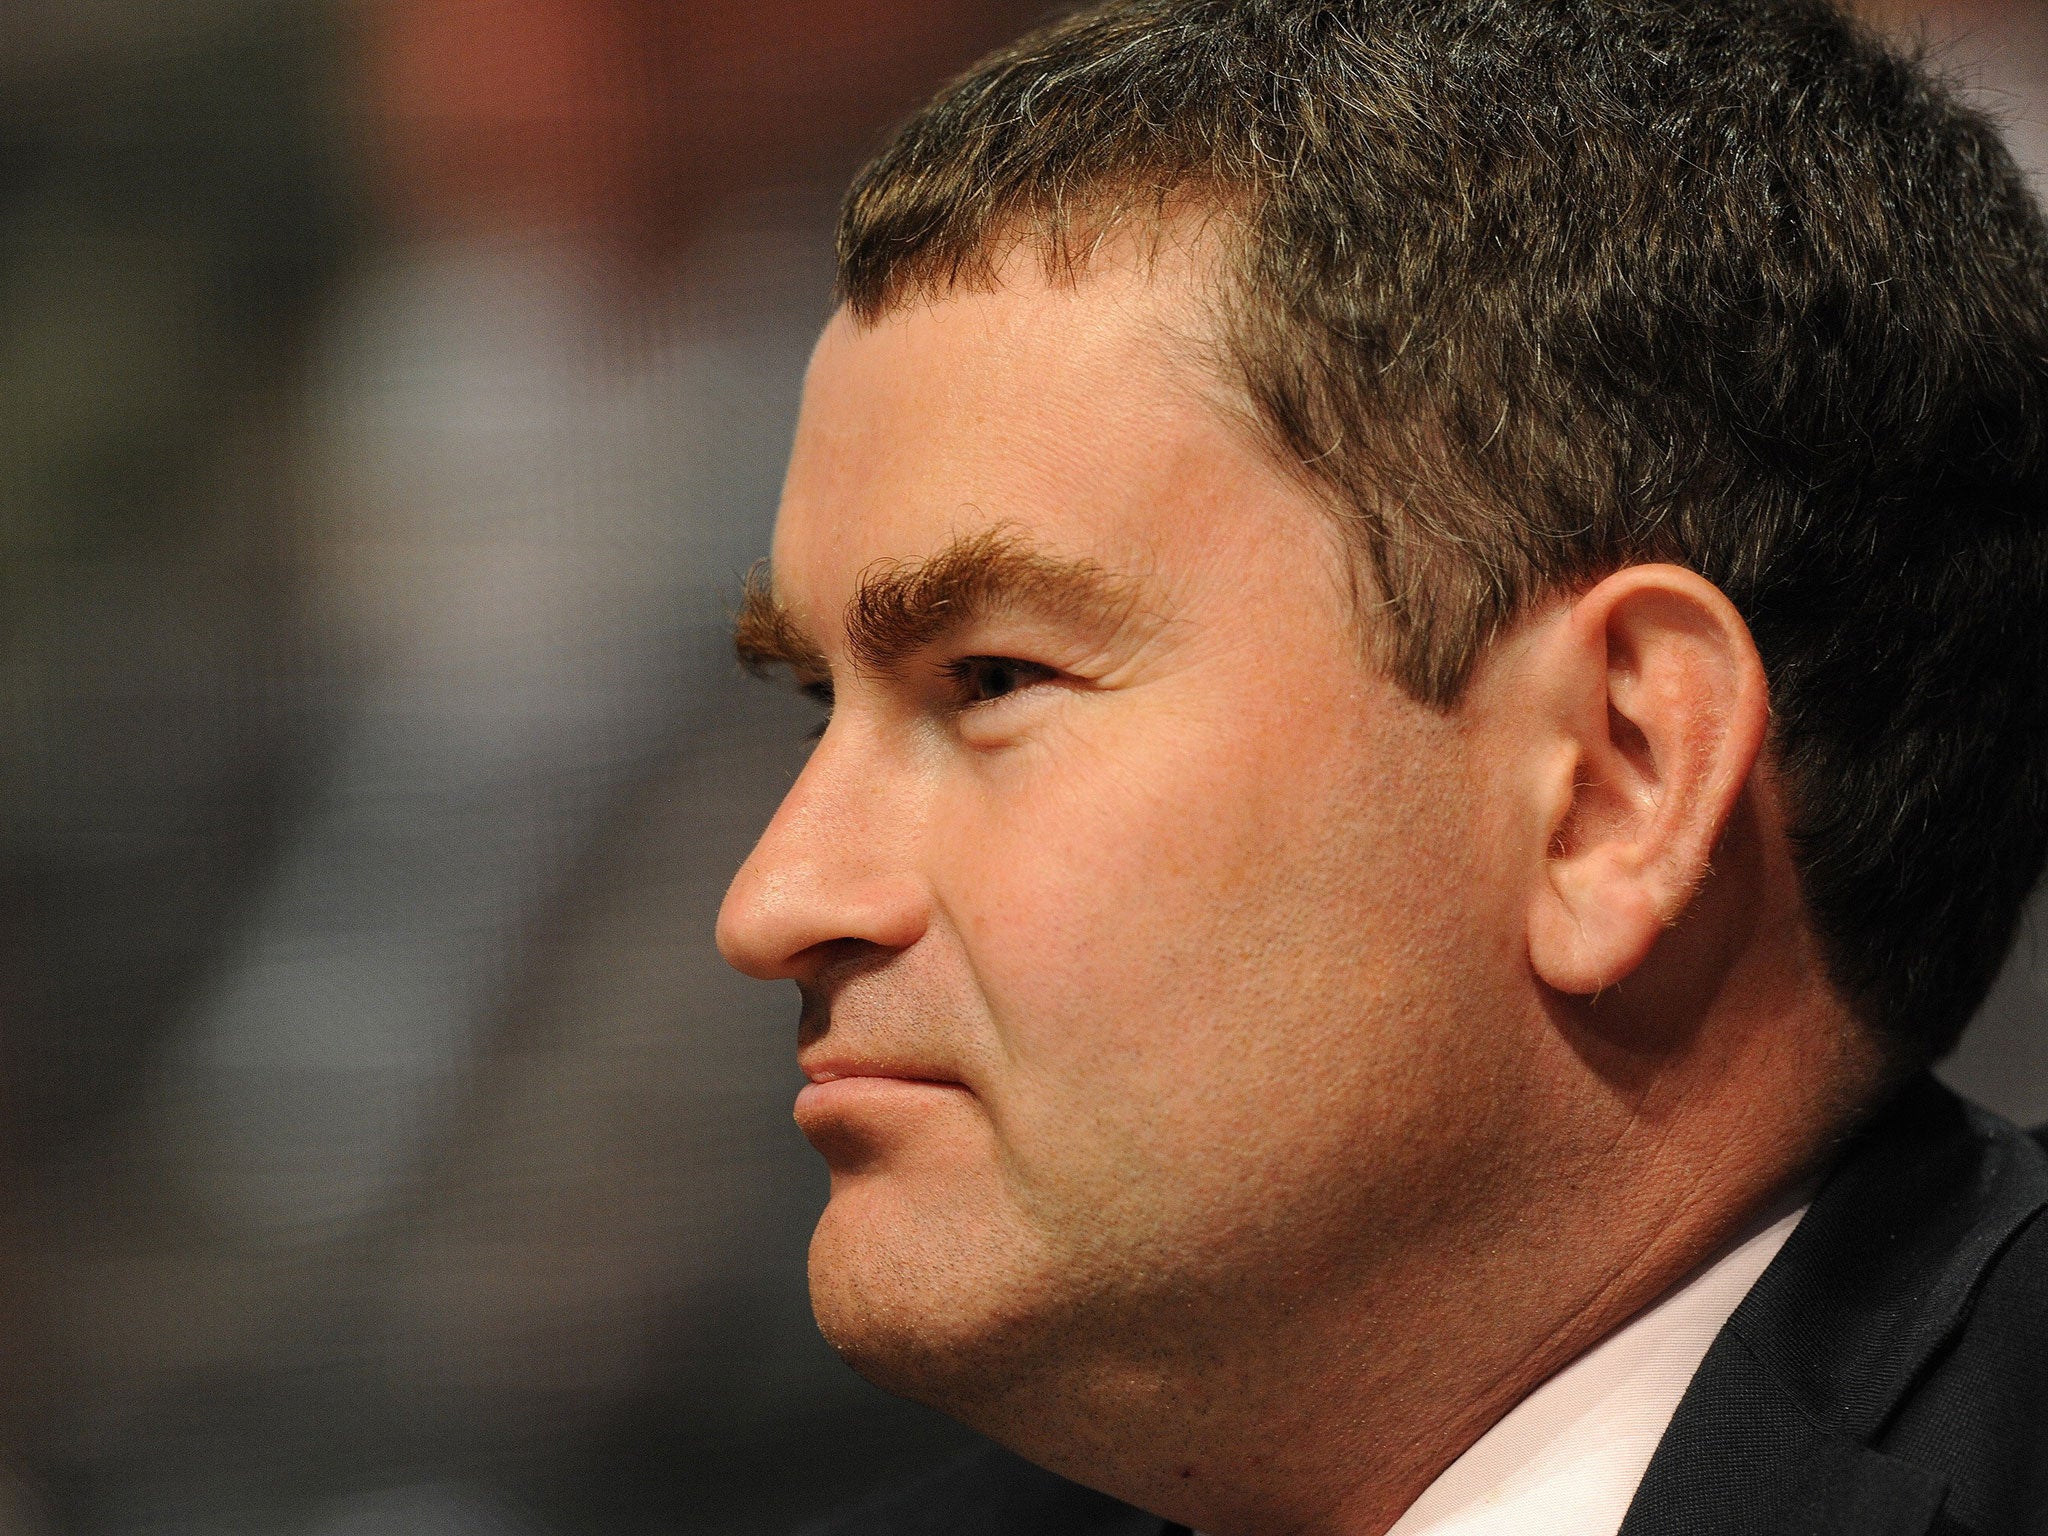 David Gauke fought the last election as an independent after he was expelled from the parliamentary Conservative Party